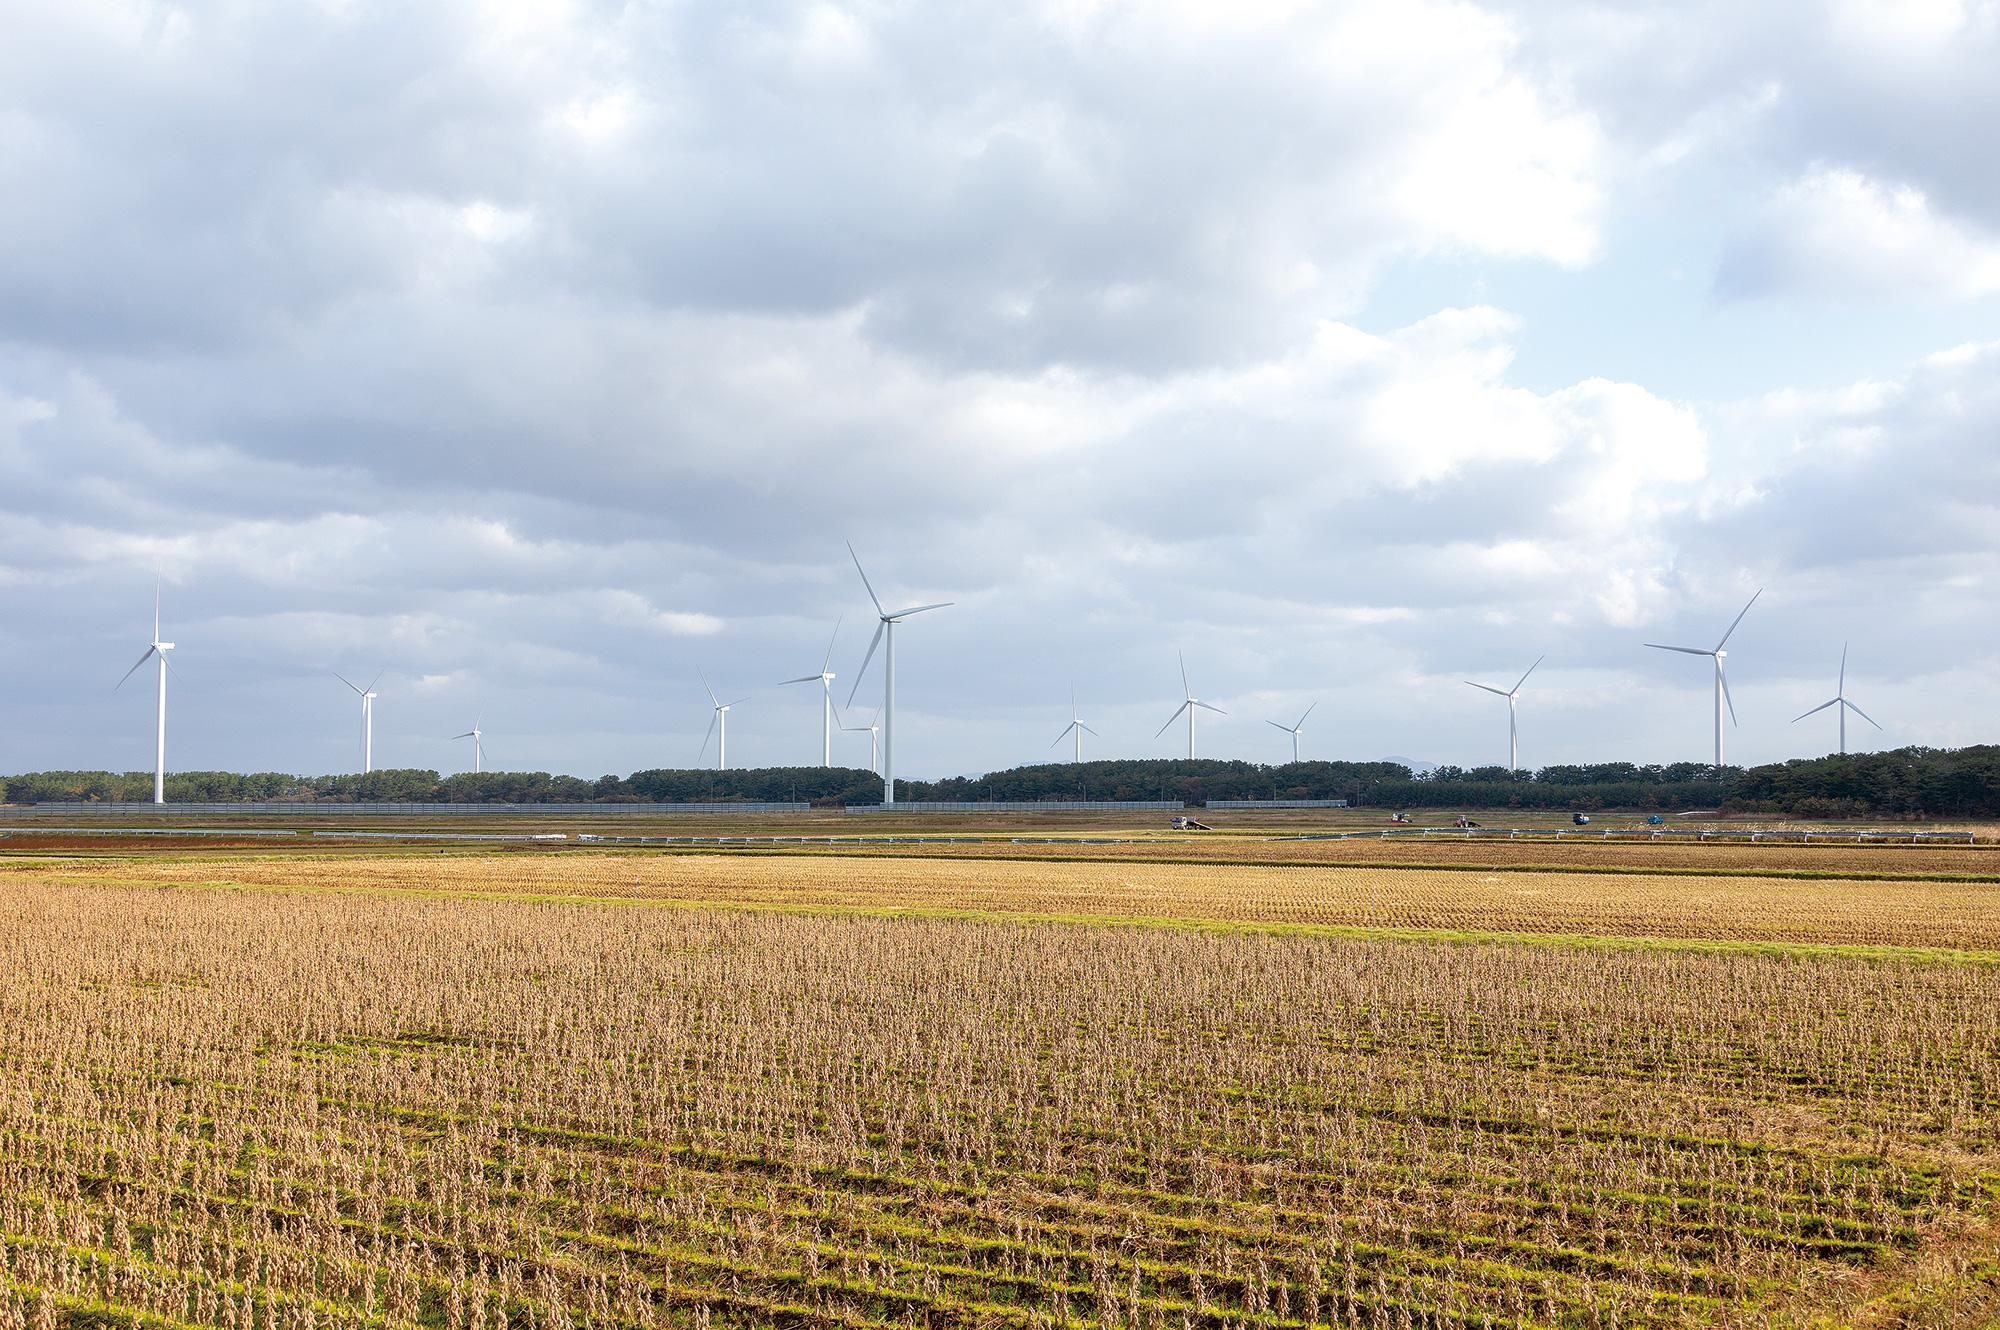 Significance of the Largest Onshore Wind Farm in Japan